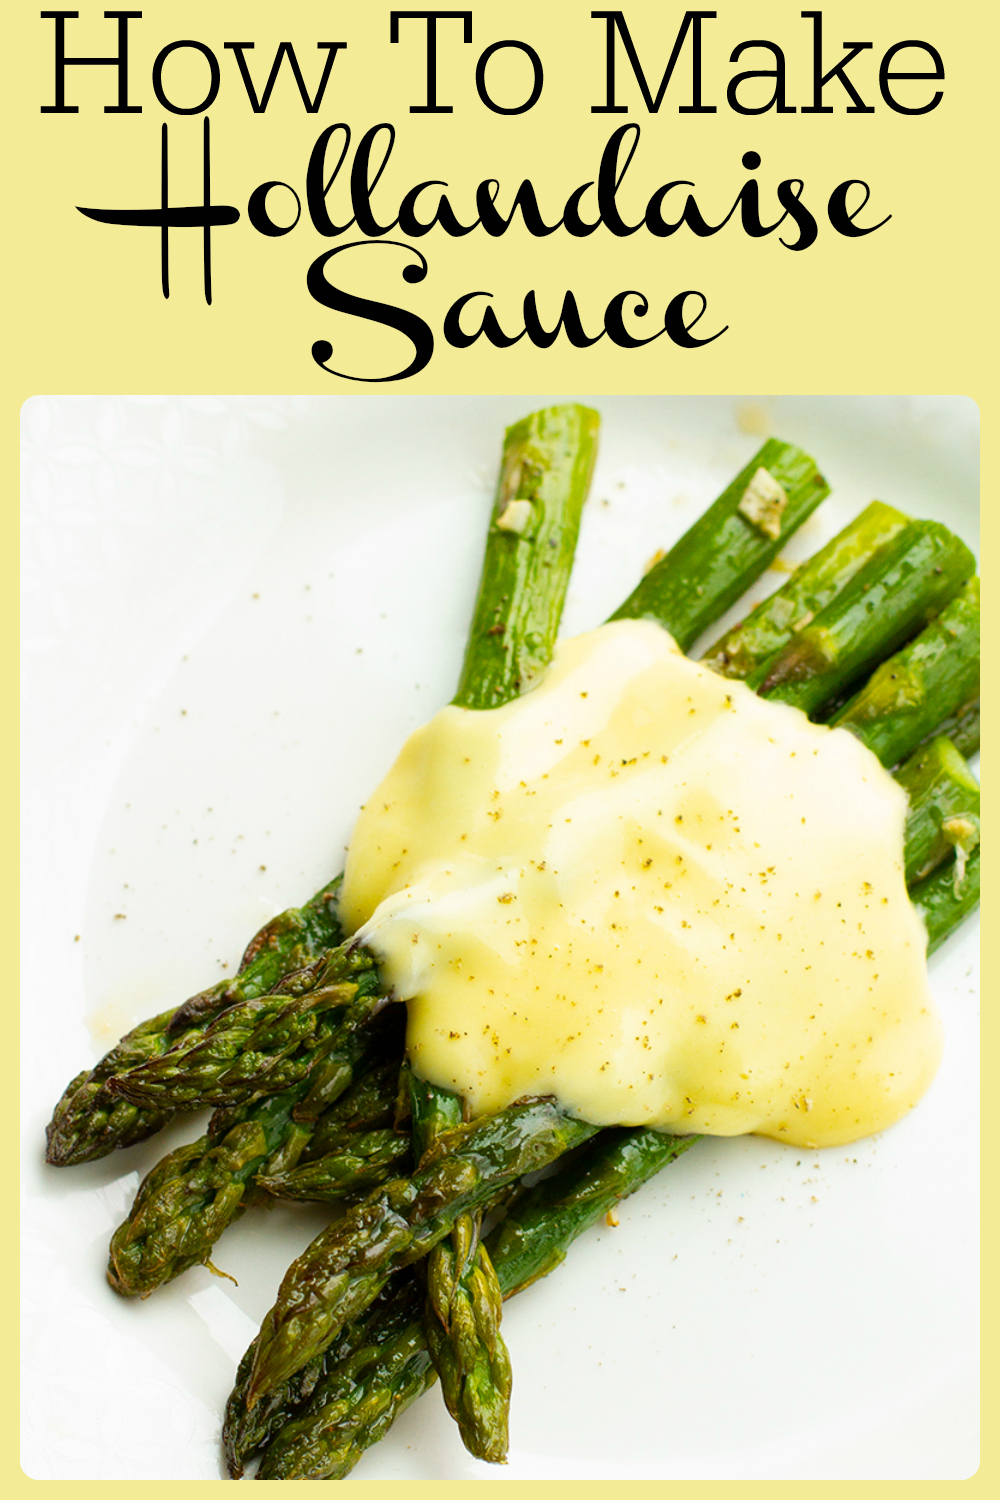 This Hollandaise Sauce is so creamy, buttery, with a touch of lemon. This is simple, and SO delicious! #hollandaise #breakfast